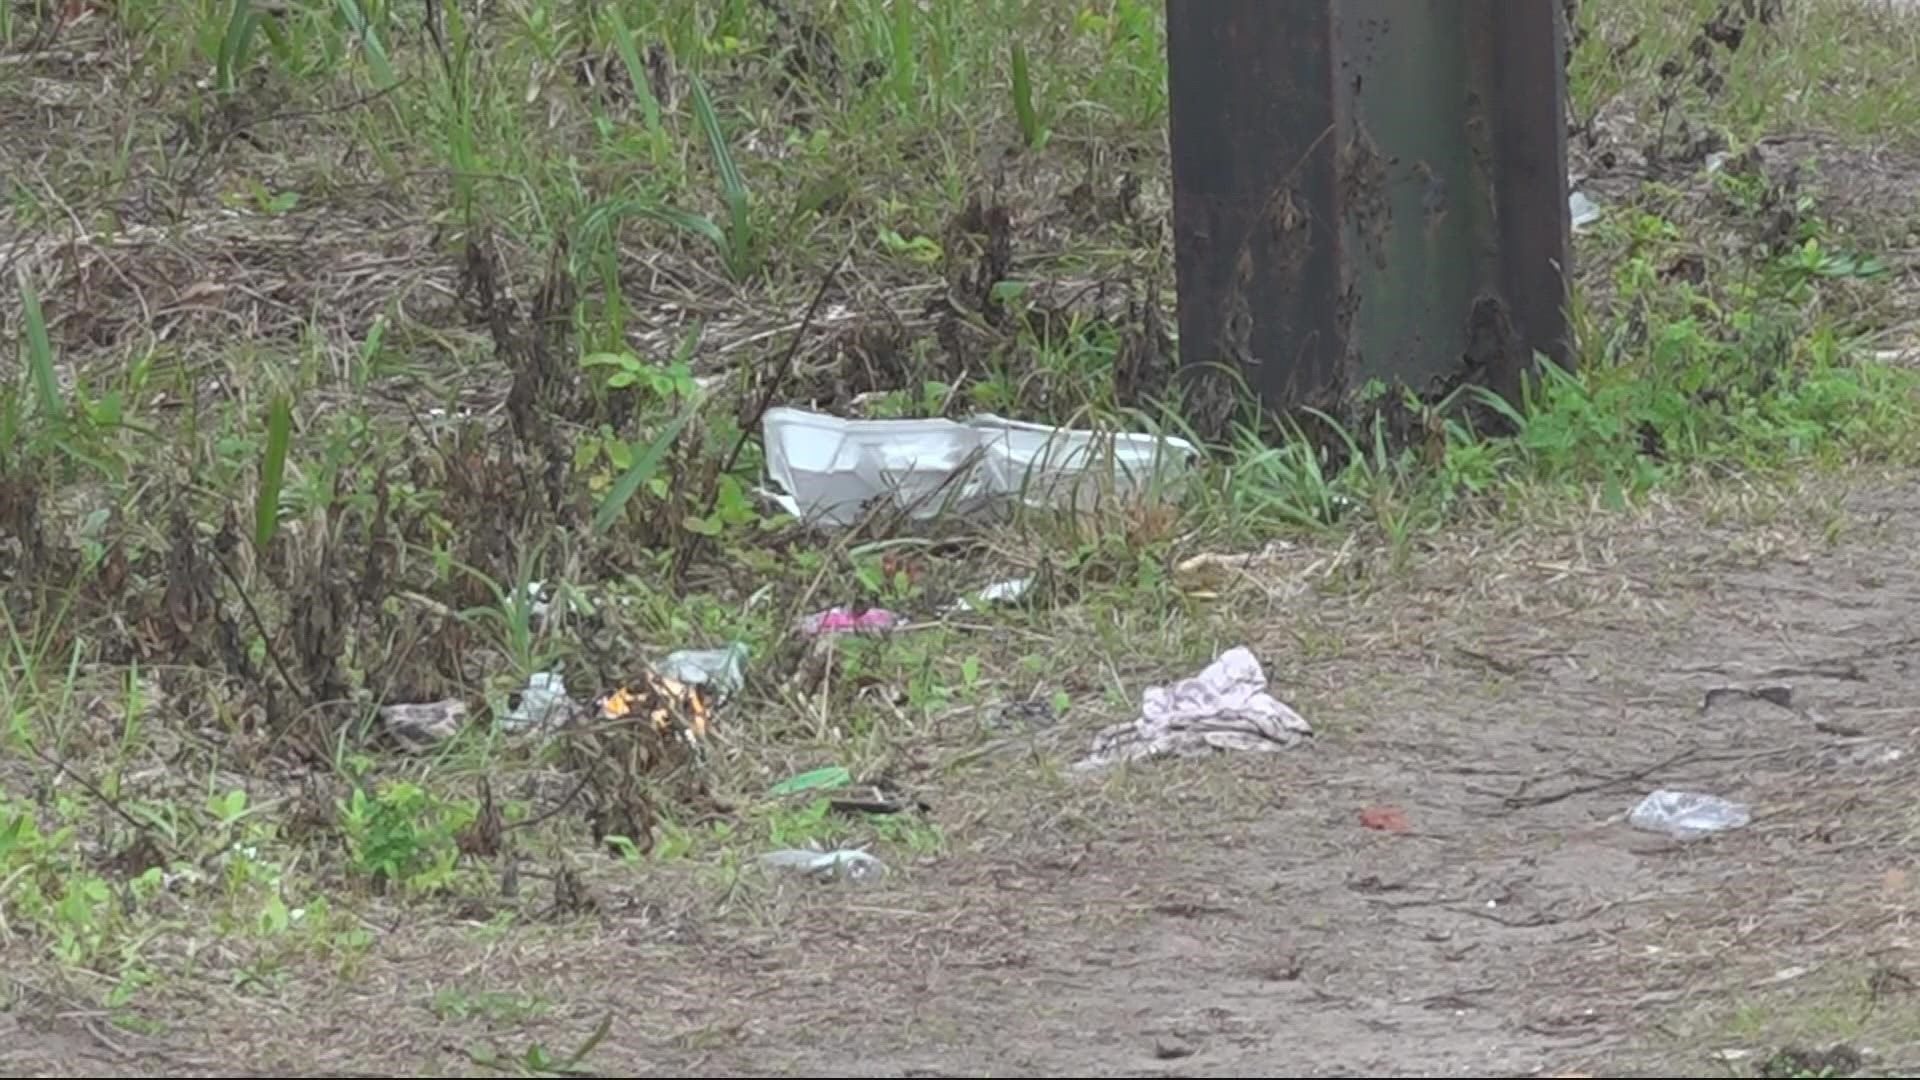 The Jacksonville Sheriff's Office has created the 'Blight Abatement Unit' with the goal of cleaning up the city and holding property owner’s accountable.